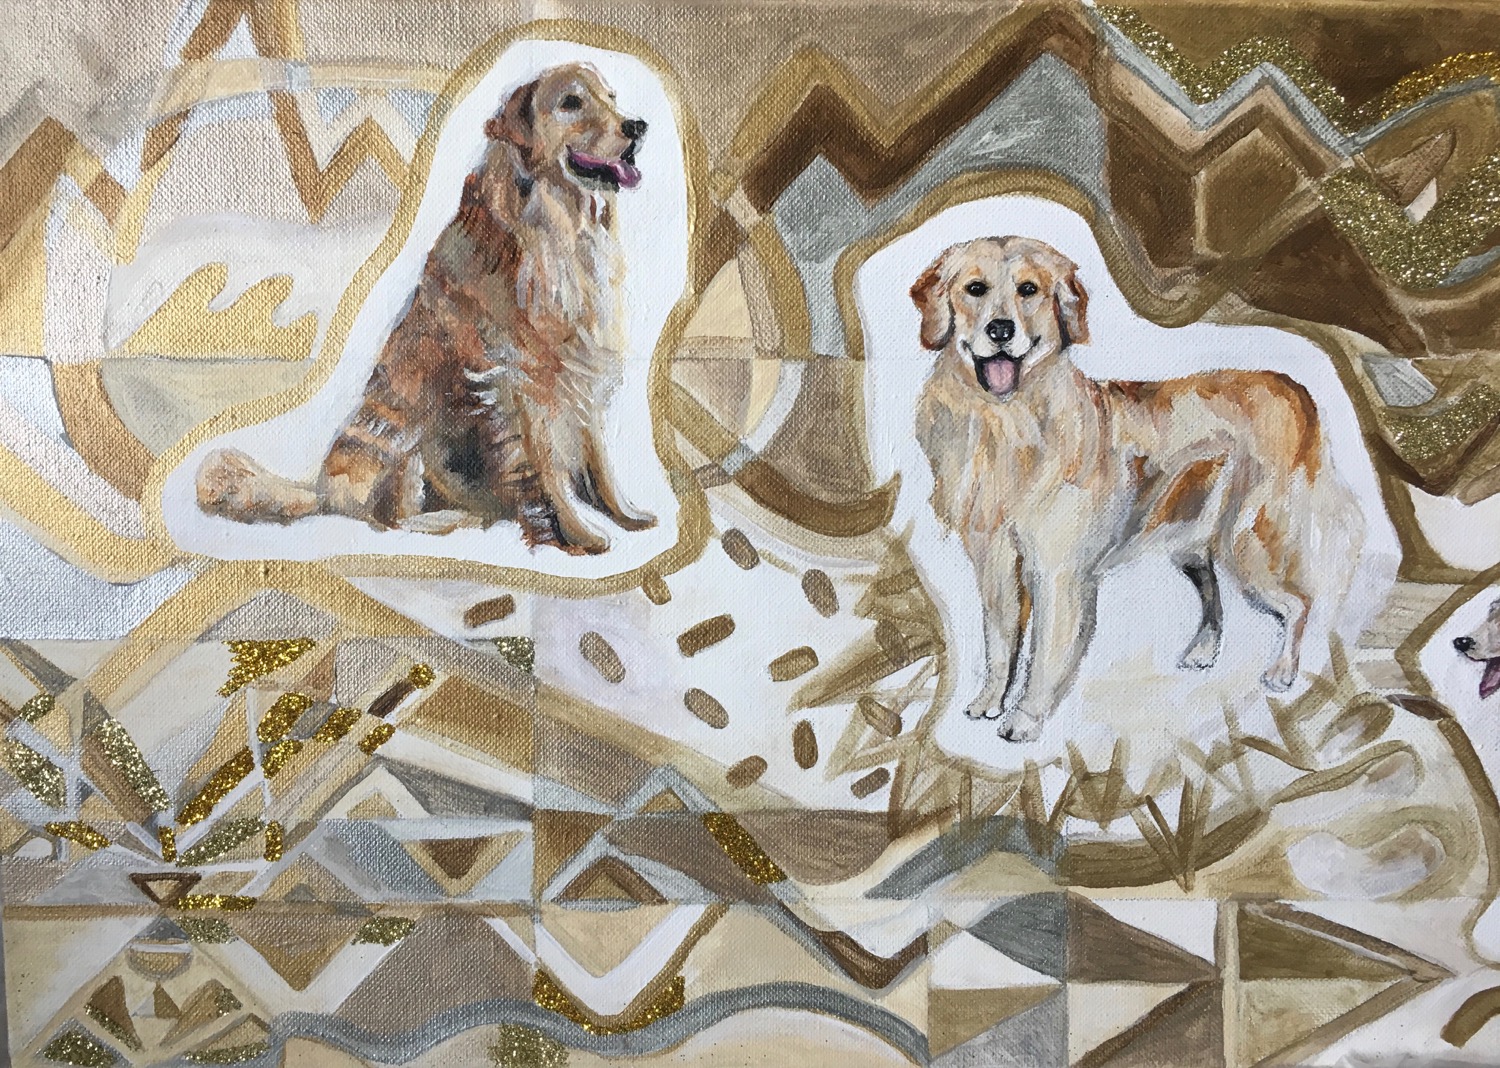 Detail of Goldens in Gold, Acrylic and Glitter on Canvas, 12 x 24 inches, 2019